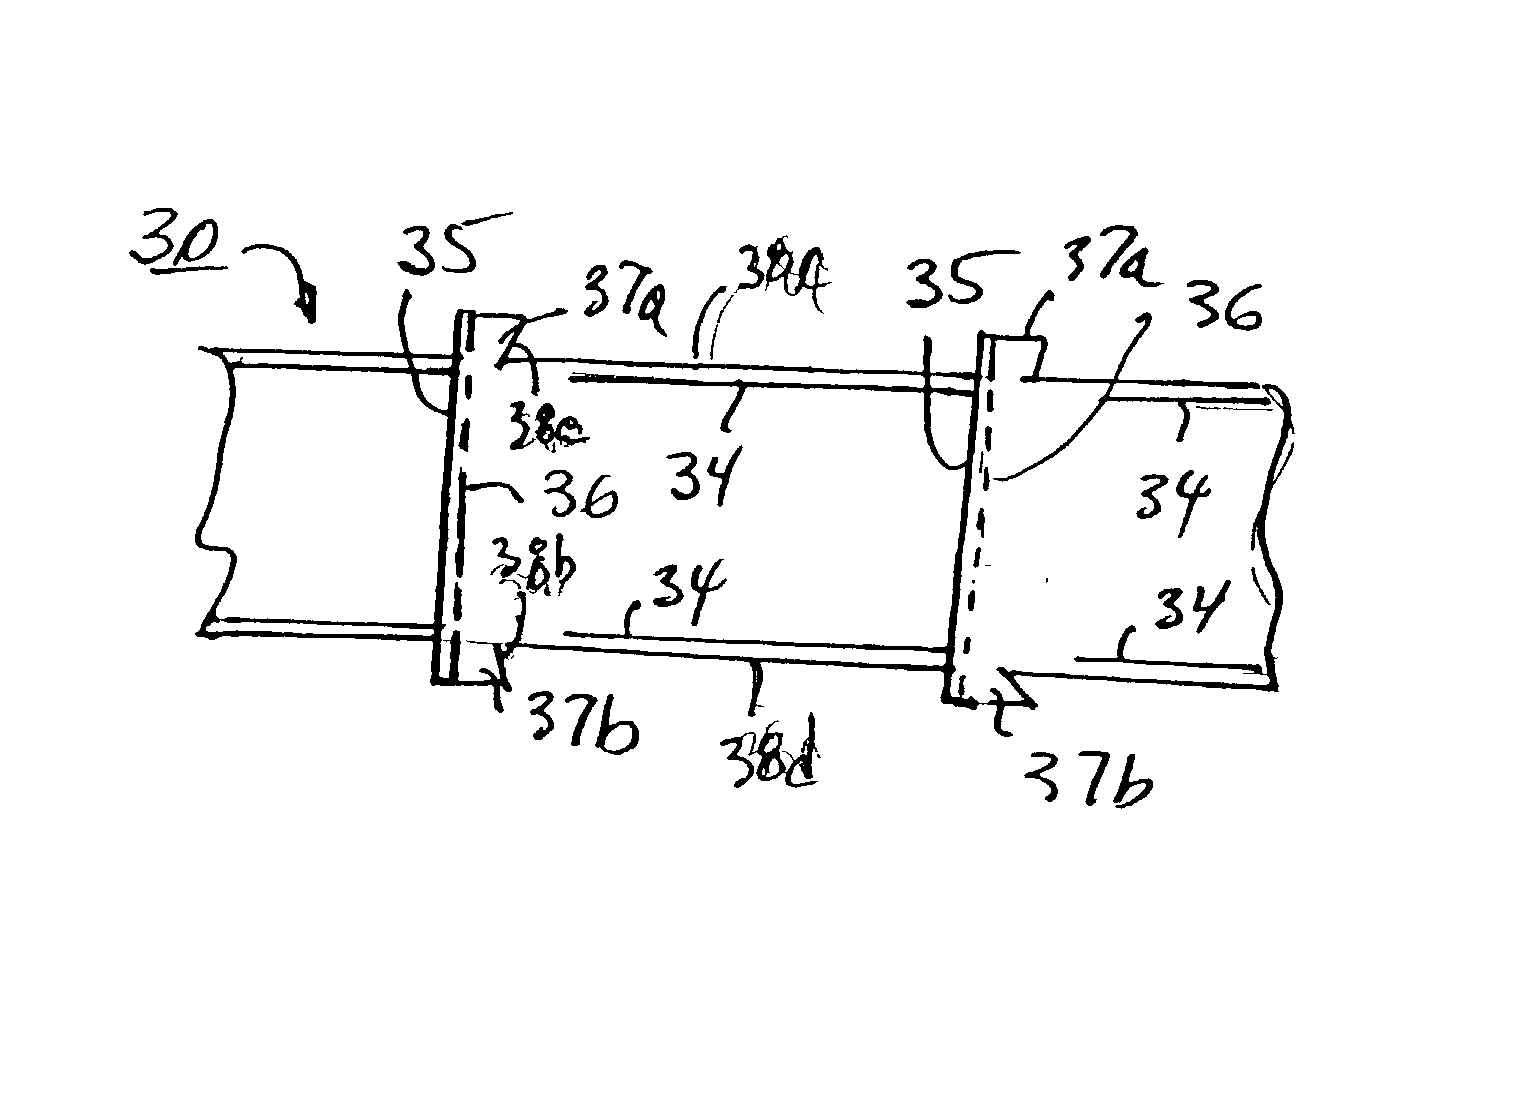 Continuous strip of plastic bags, method and apparatus for making same, and novel plastic bag constructions